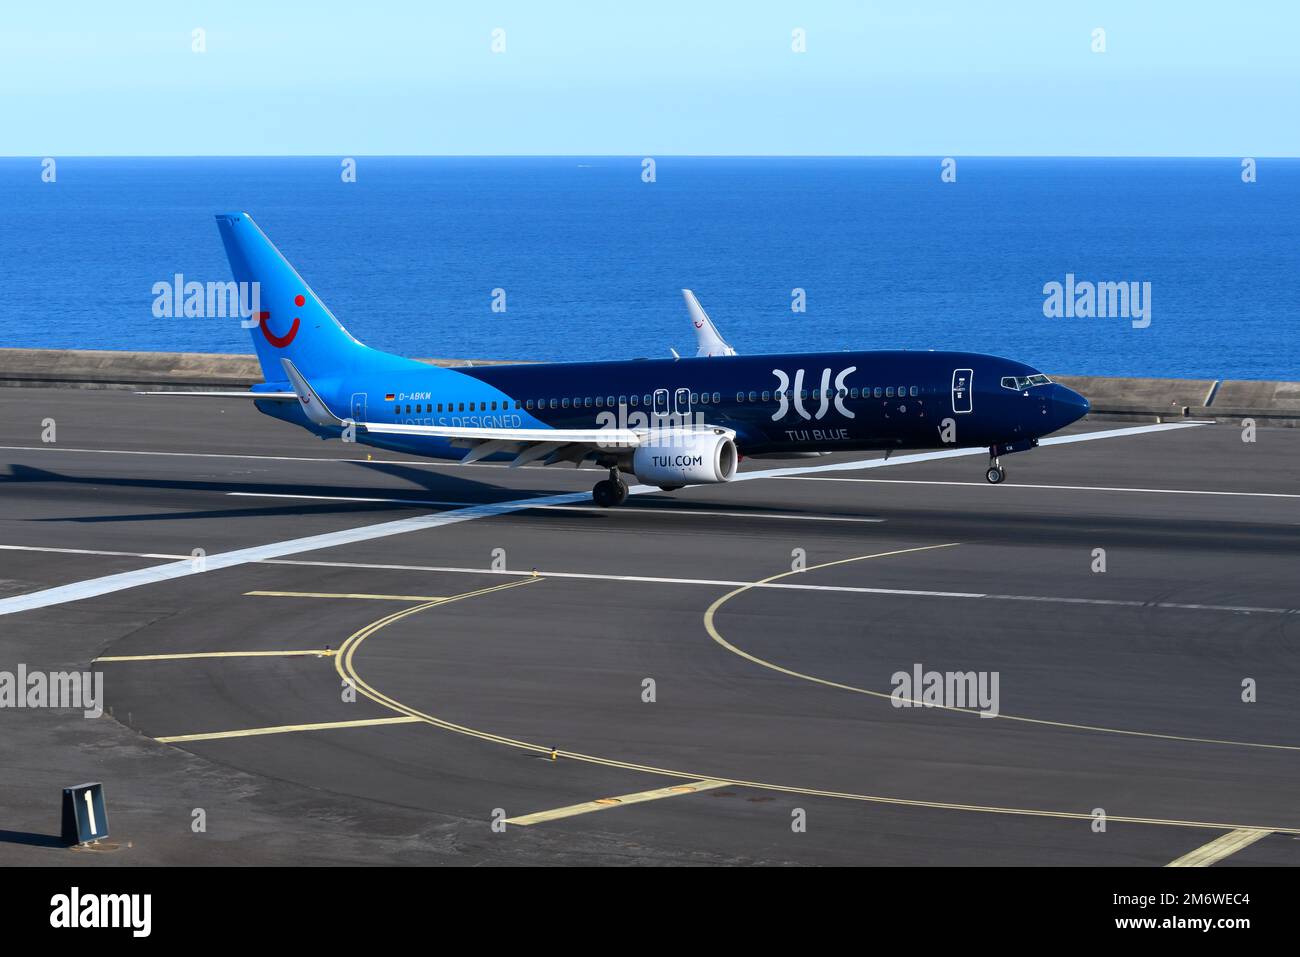 TUI Germany Boeing 737 aircraft landing at Madeira Airport with crosswinds. Airplane of TUI arriving at Funchal Airport with crosswind turbulence. Stock Photo